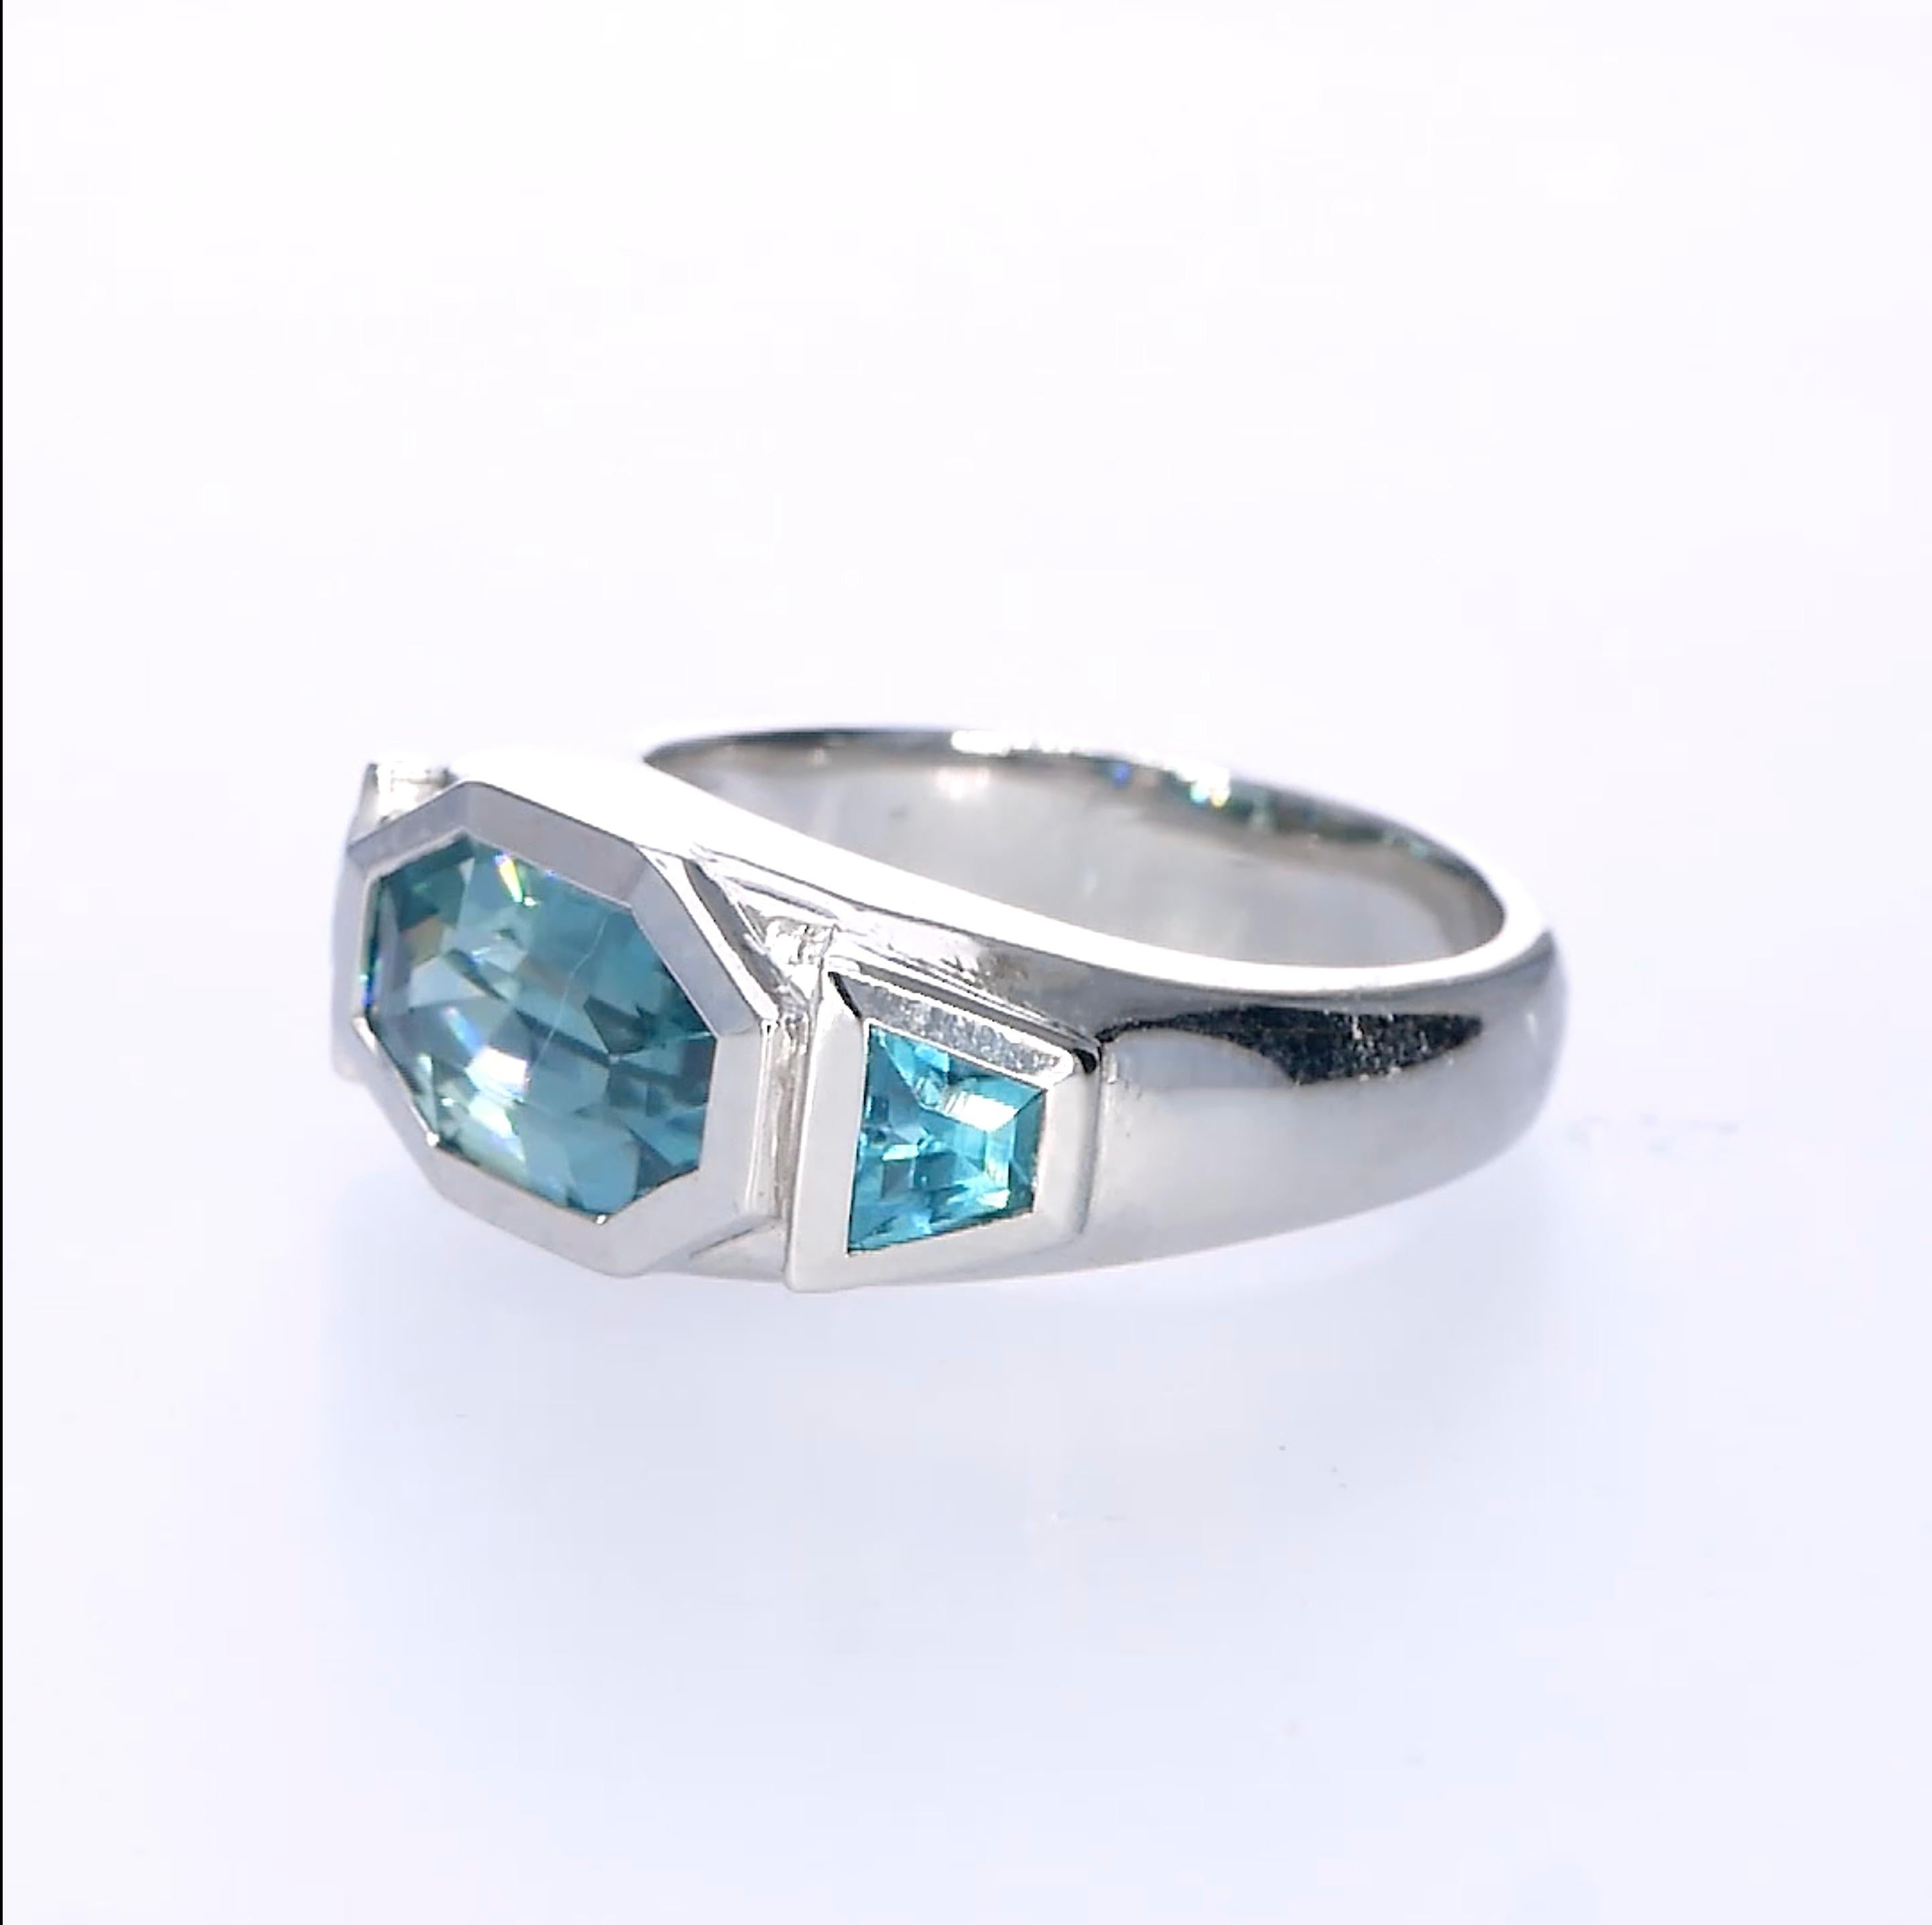 Mixed Cut Orloff of Denmark, 5.24 ct Natural Zircon Cocktail Ring in 925 Sterling Silver For Sale